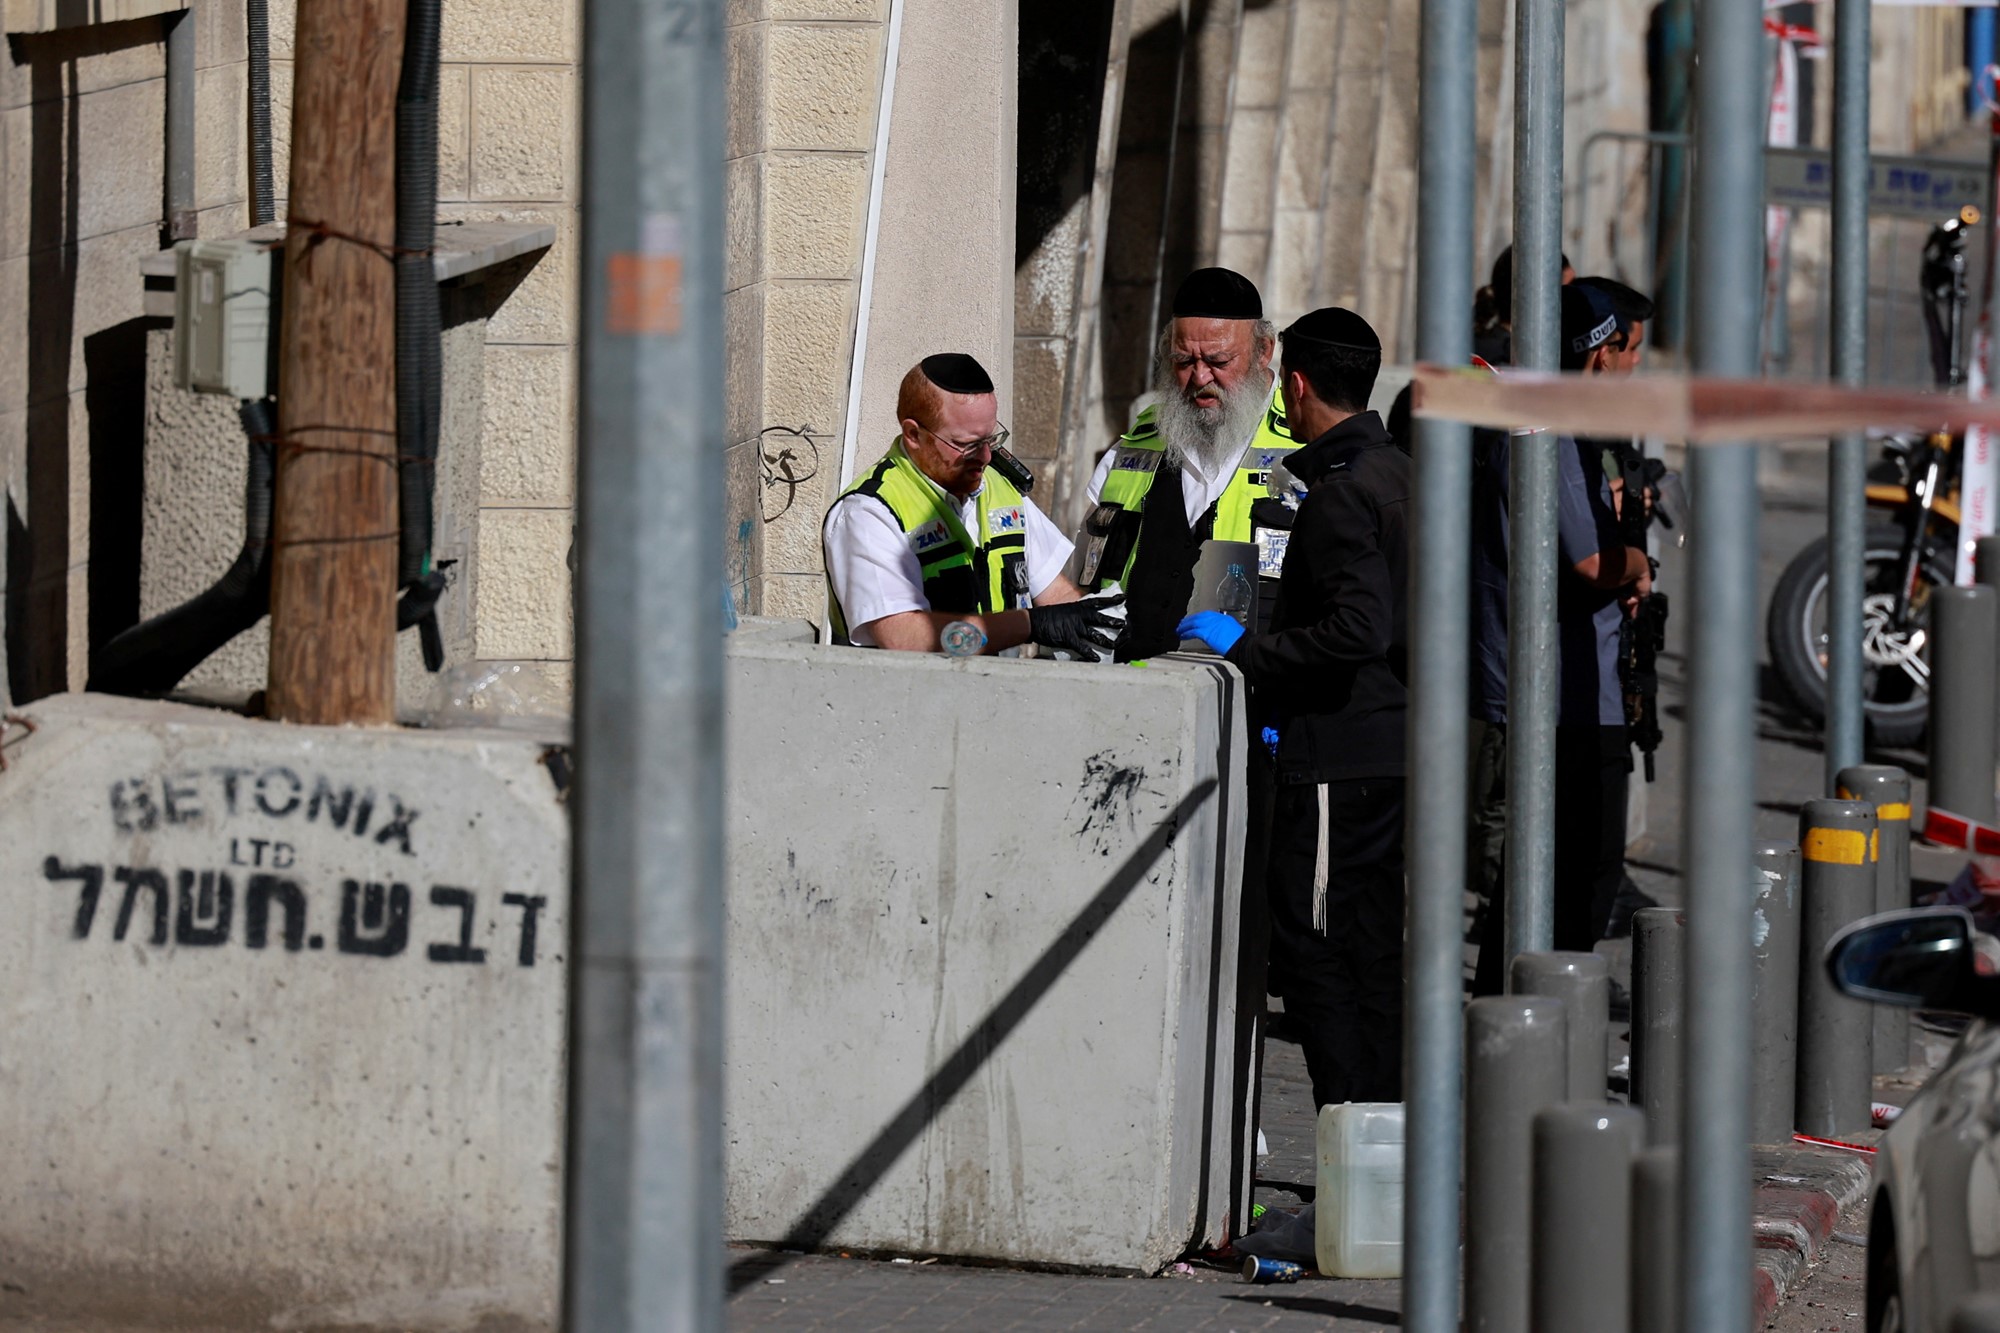 Two older men in hi-vis vests and yarmulkes stand behind a concrete barrier on a city street.